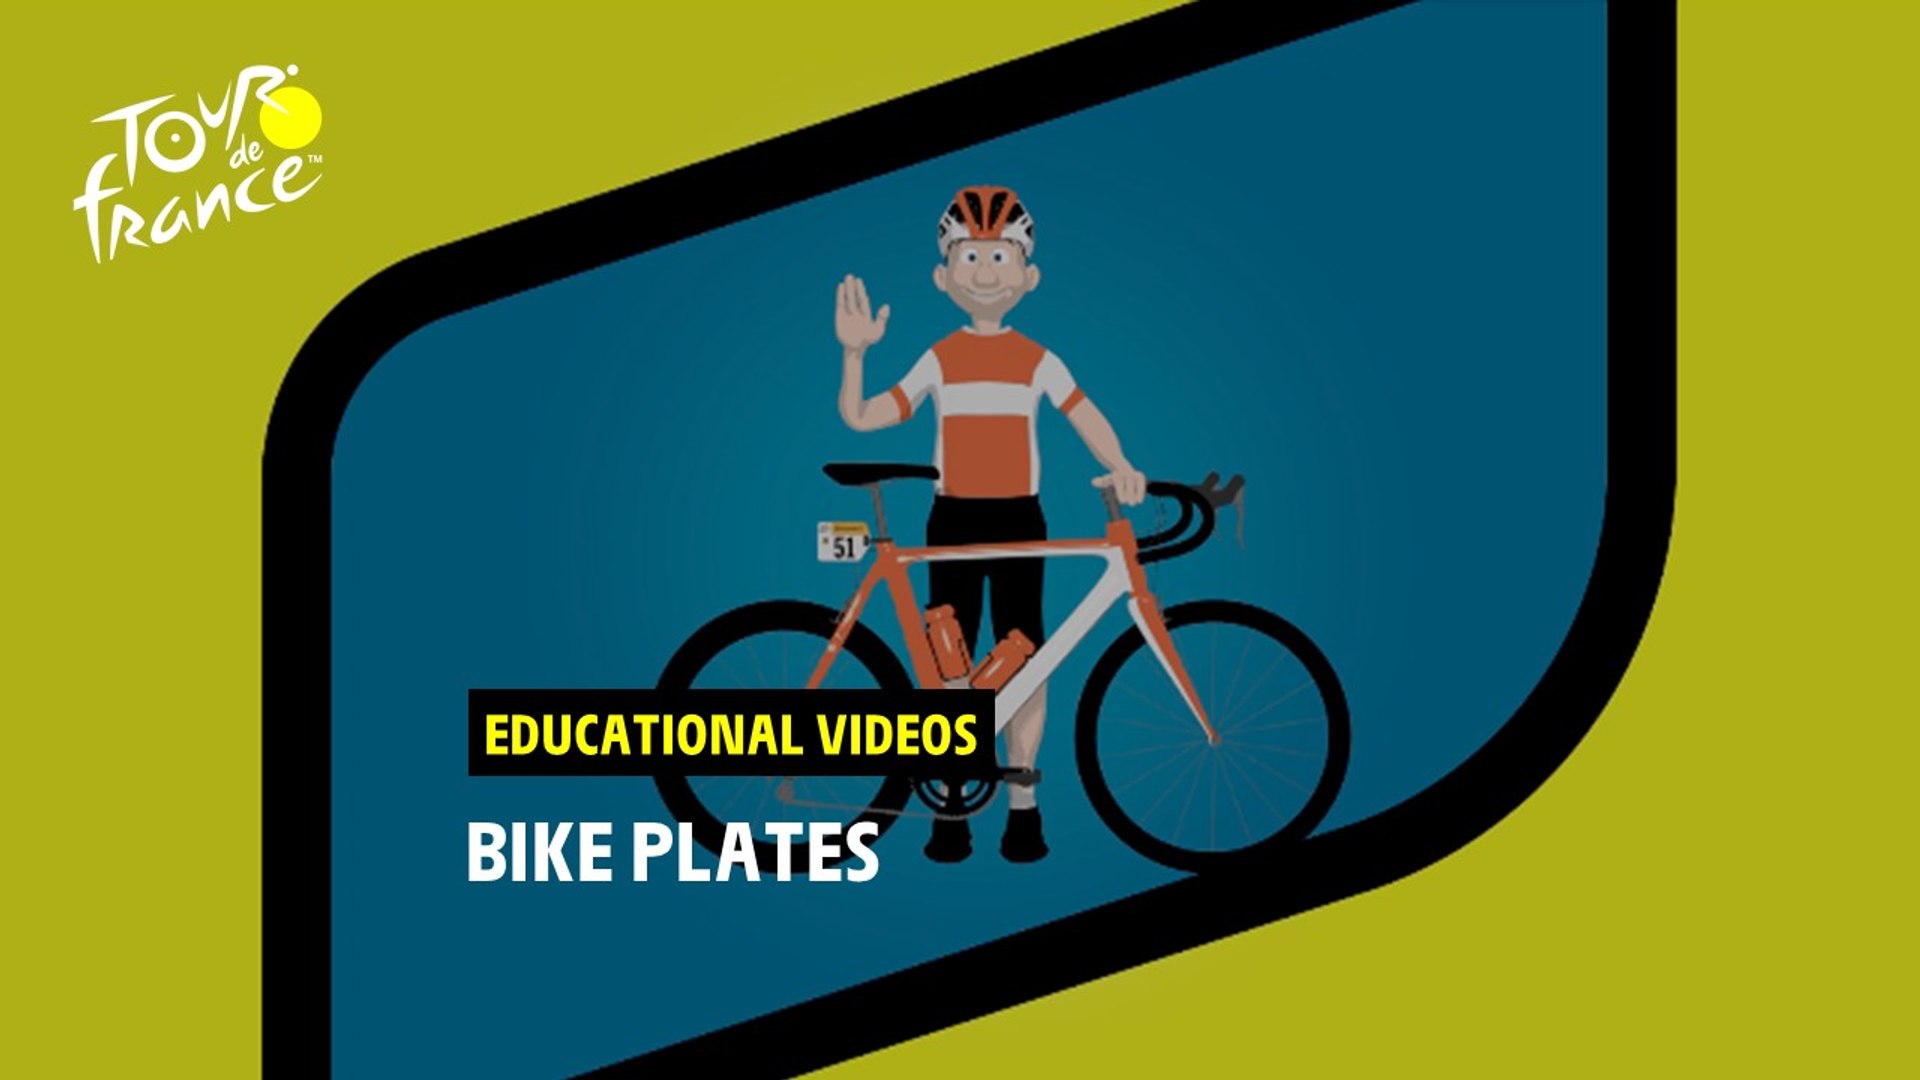 Looking to add some extra safety to your bike ride? Check out our educational videos on bike plates!